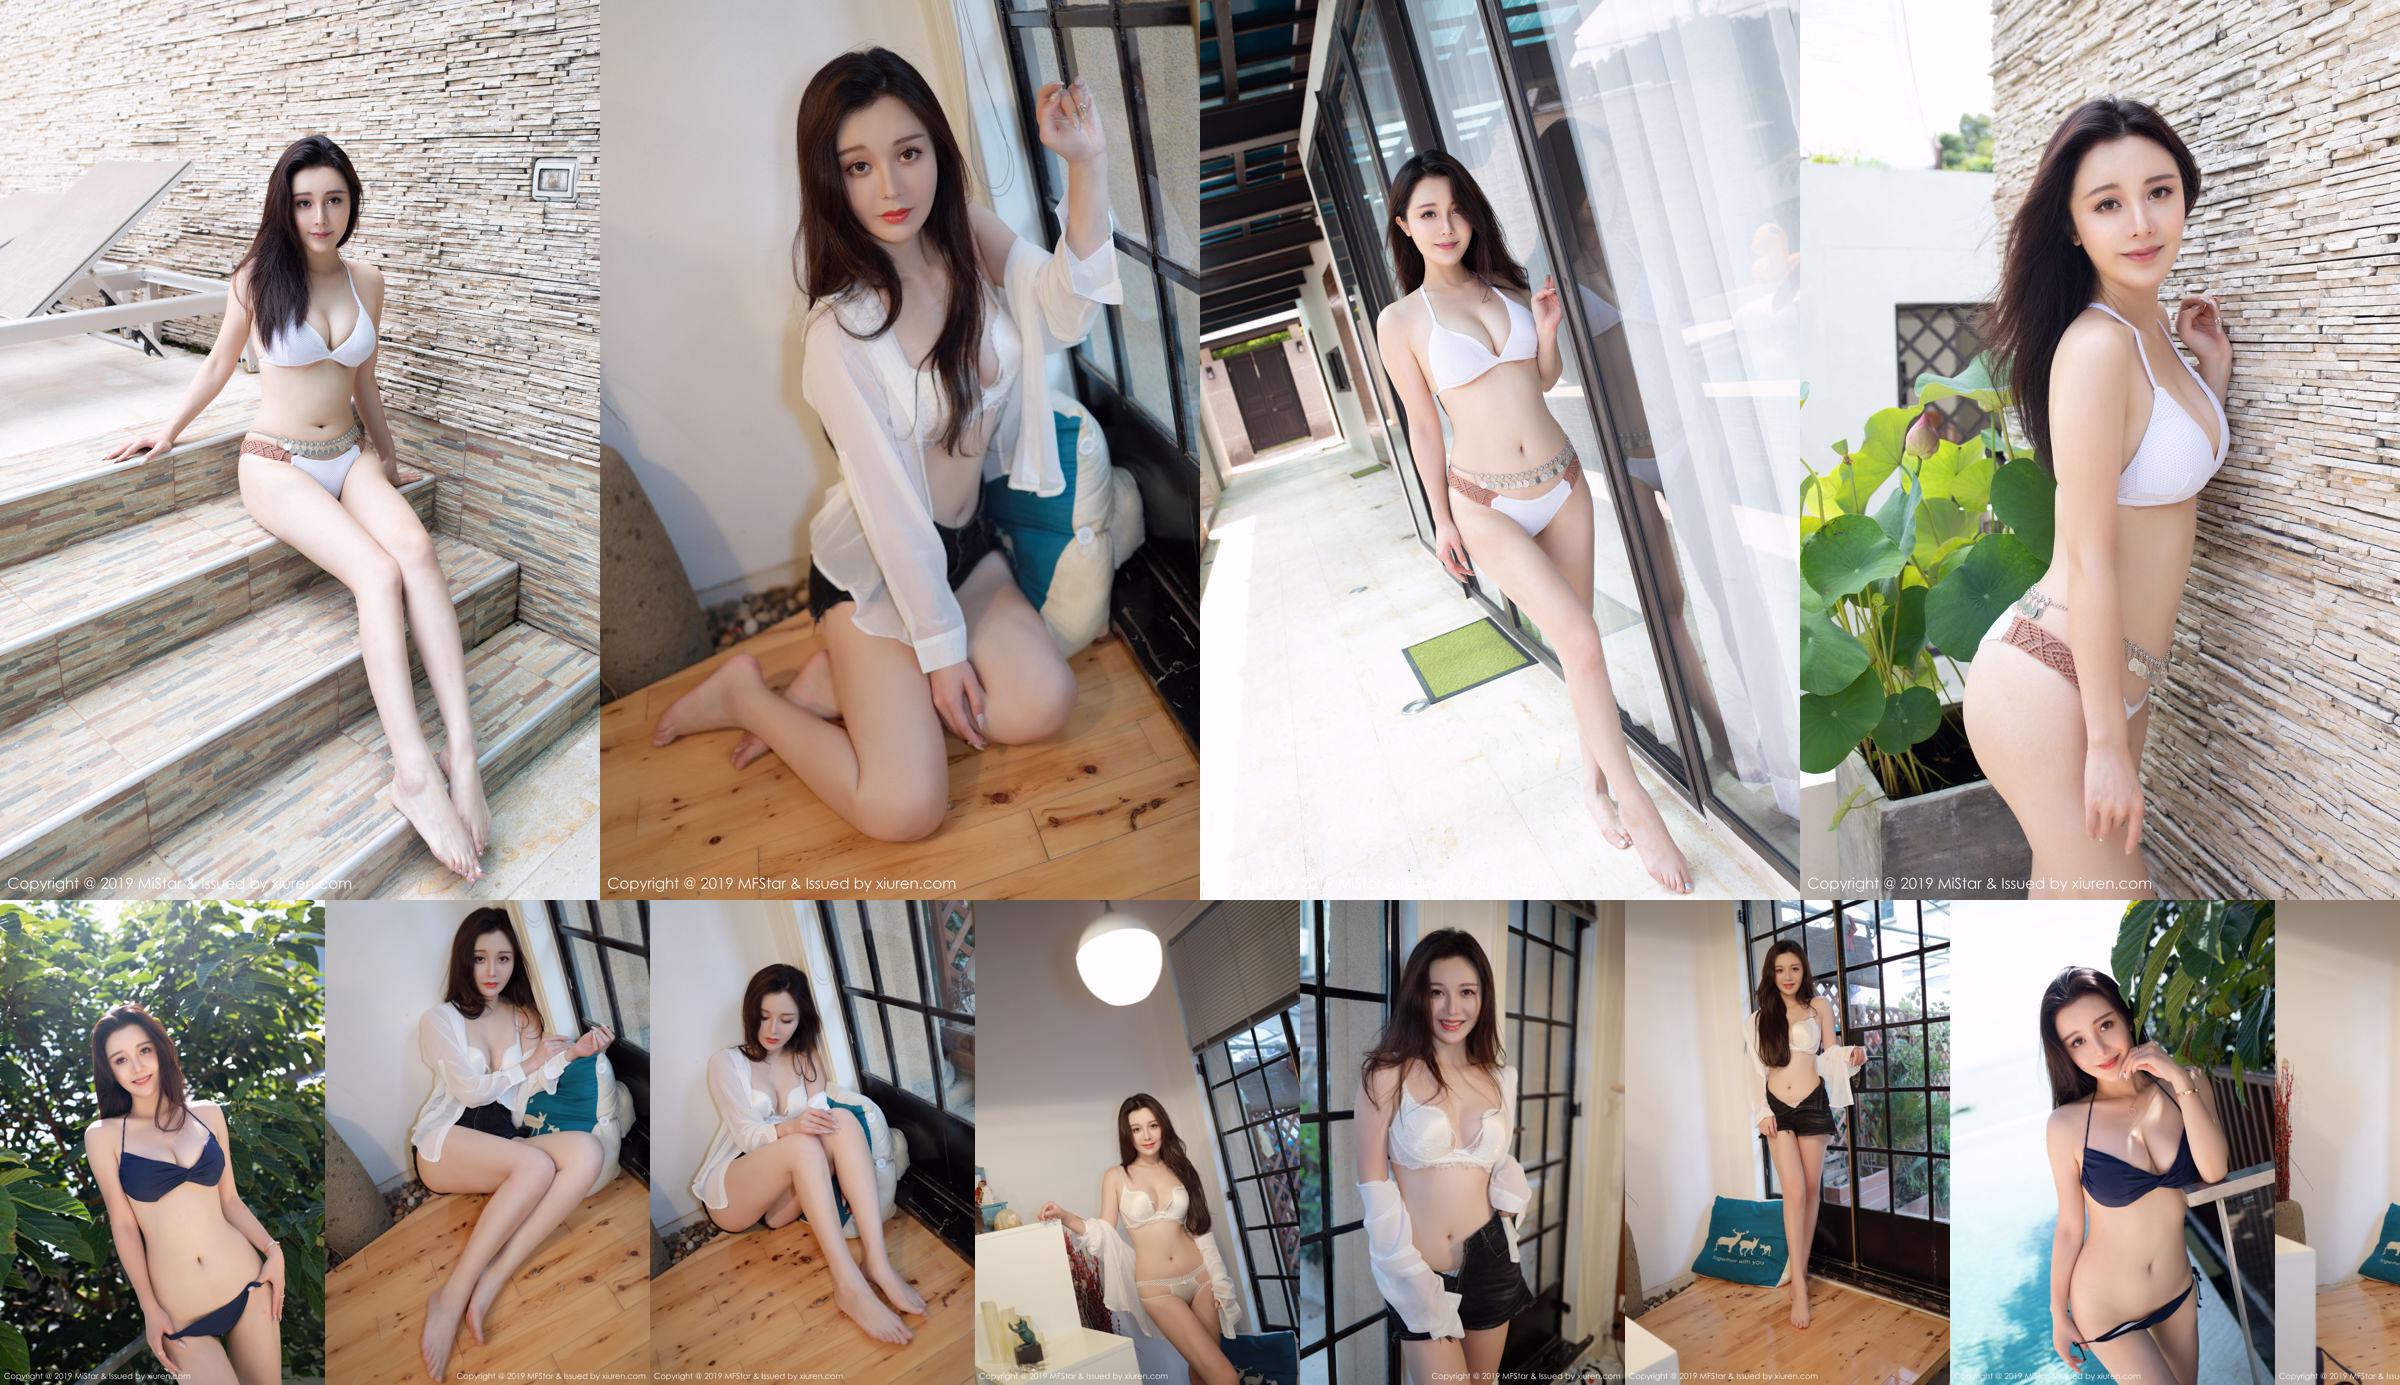 Bonnie Boonie "Body is tall, multi-faceted, delicate and beautiful" [Model Academy MFStar] Vol.227 No.1f5ffa Page 1